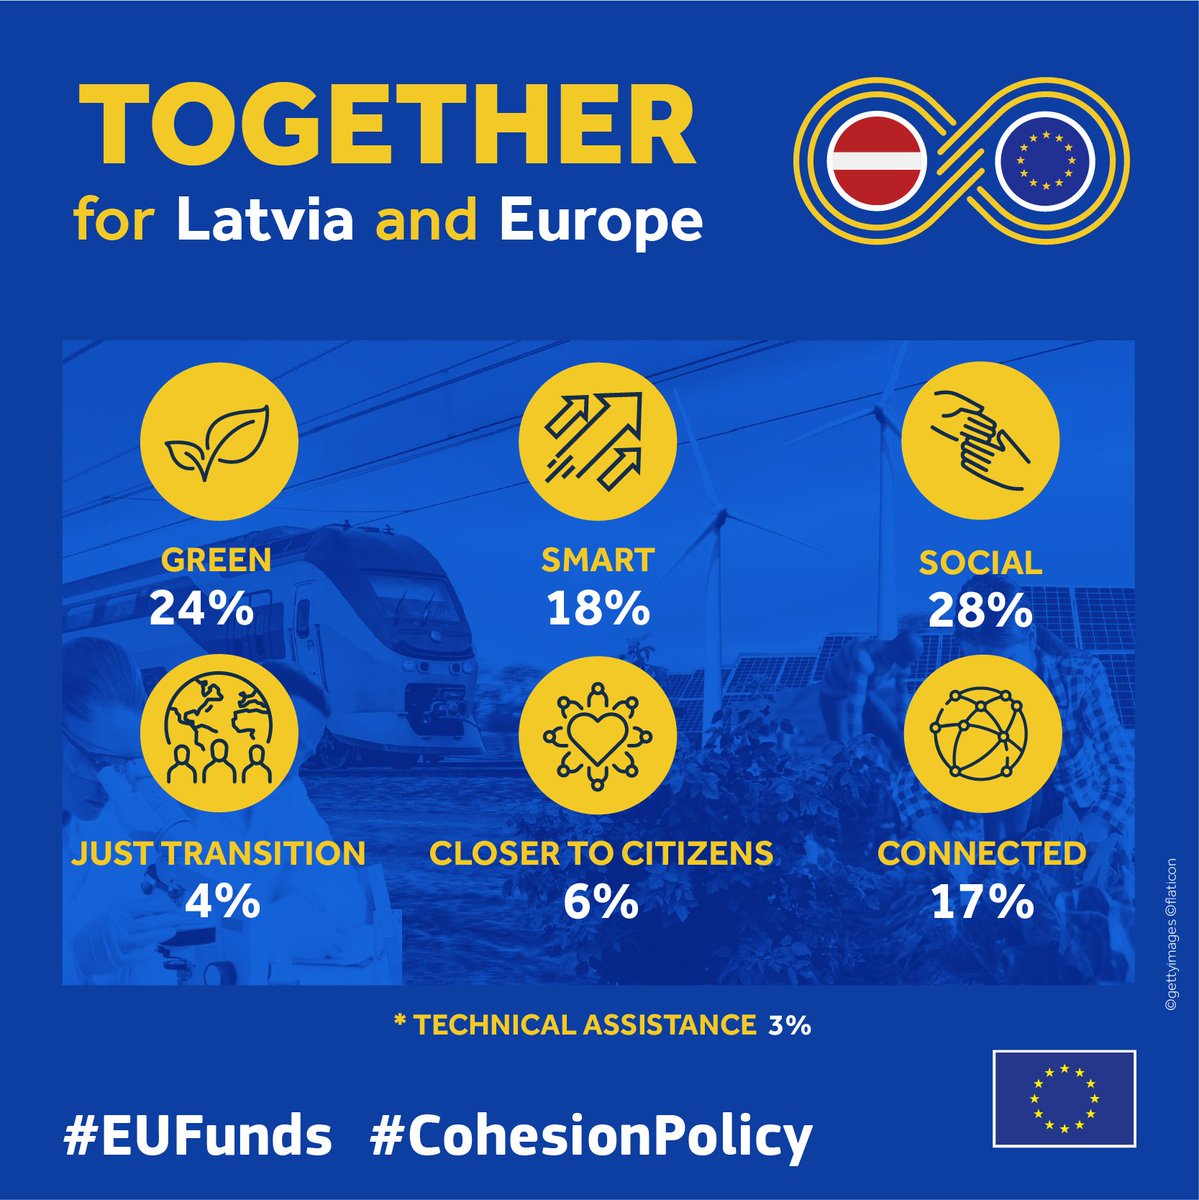 The 23rd Partnership Agreement for 2021-2027 #CohesionPolicy investments is adopted! Latvia will receive €4.57 bn to support: ♦️economic, social & territorial cohesion ♦️renewable energy sources ♦️end of peat for energy ♦️better infrastructure More👉europa.eu/!hnxr9K